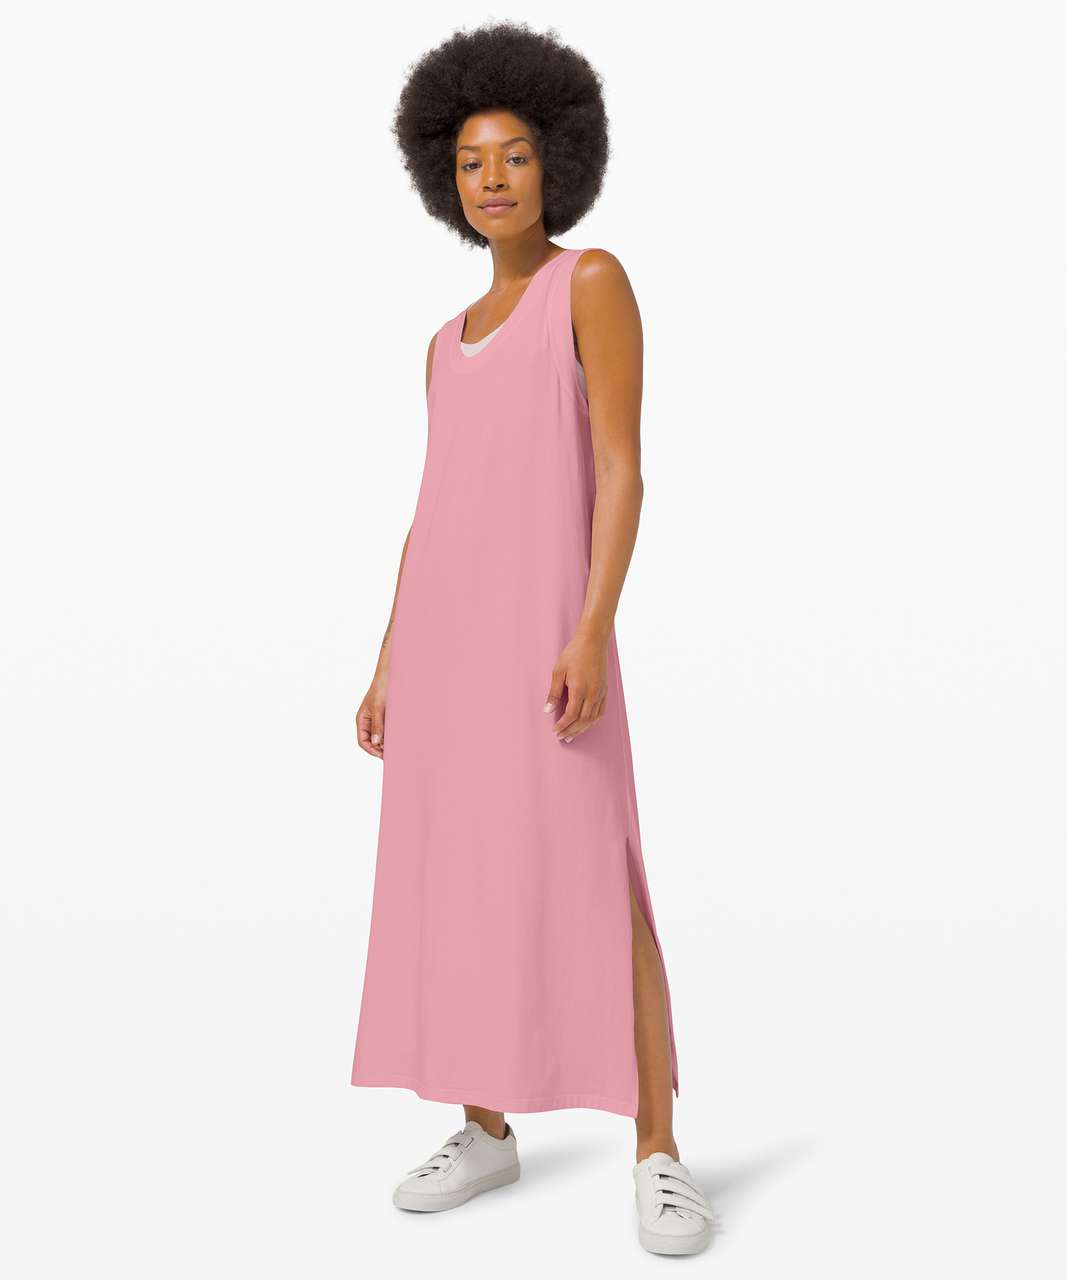 Lululemon All Yours Tank Maxi Dress - Pink Taupe